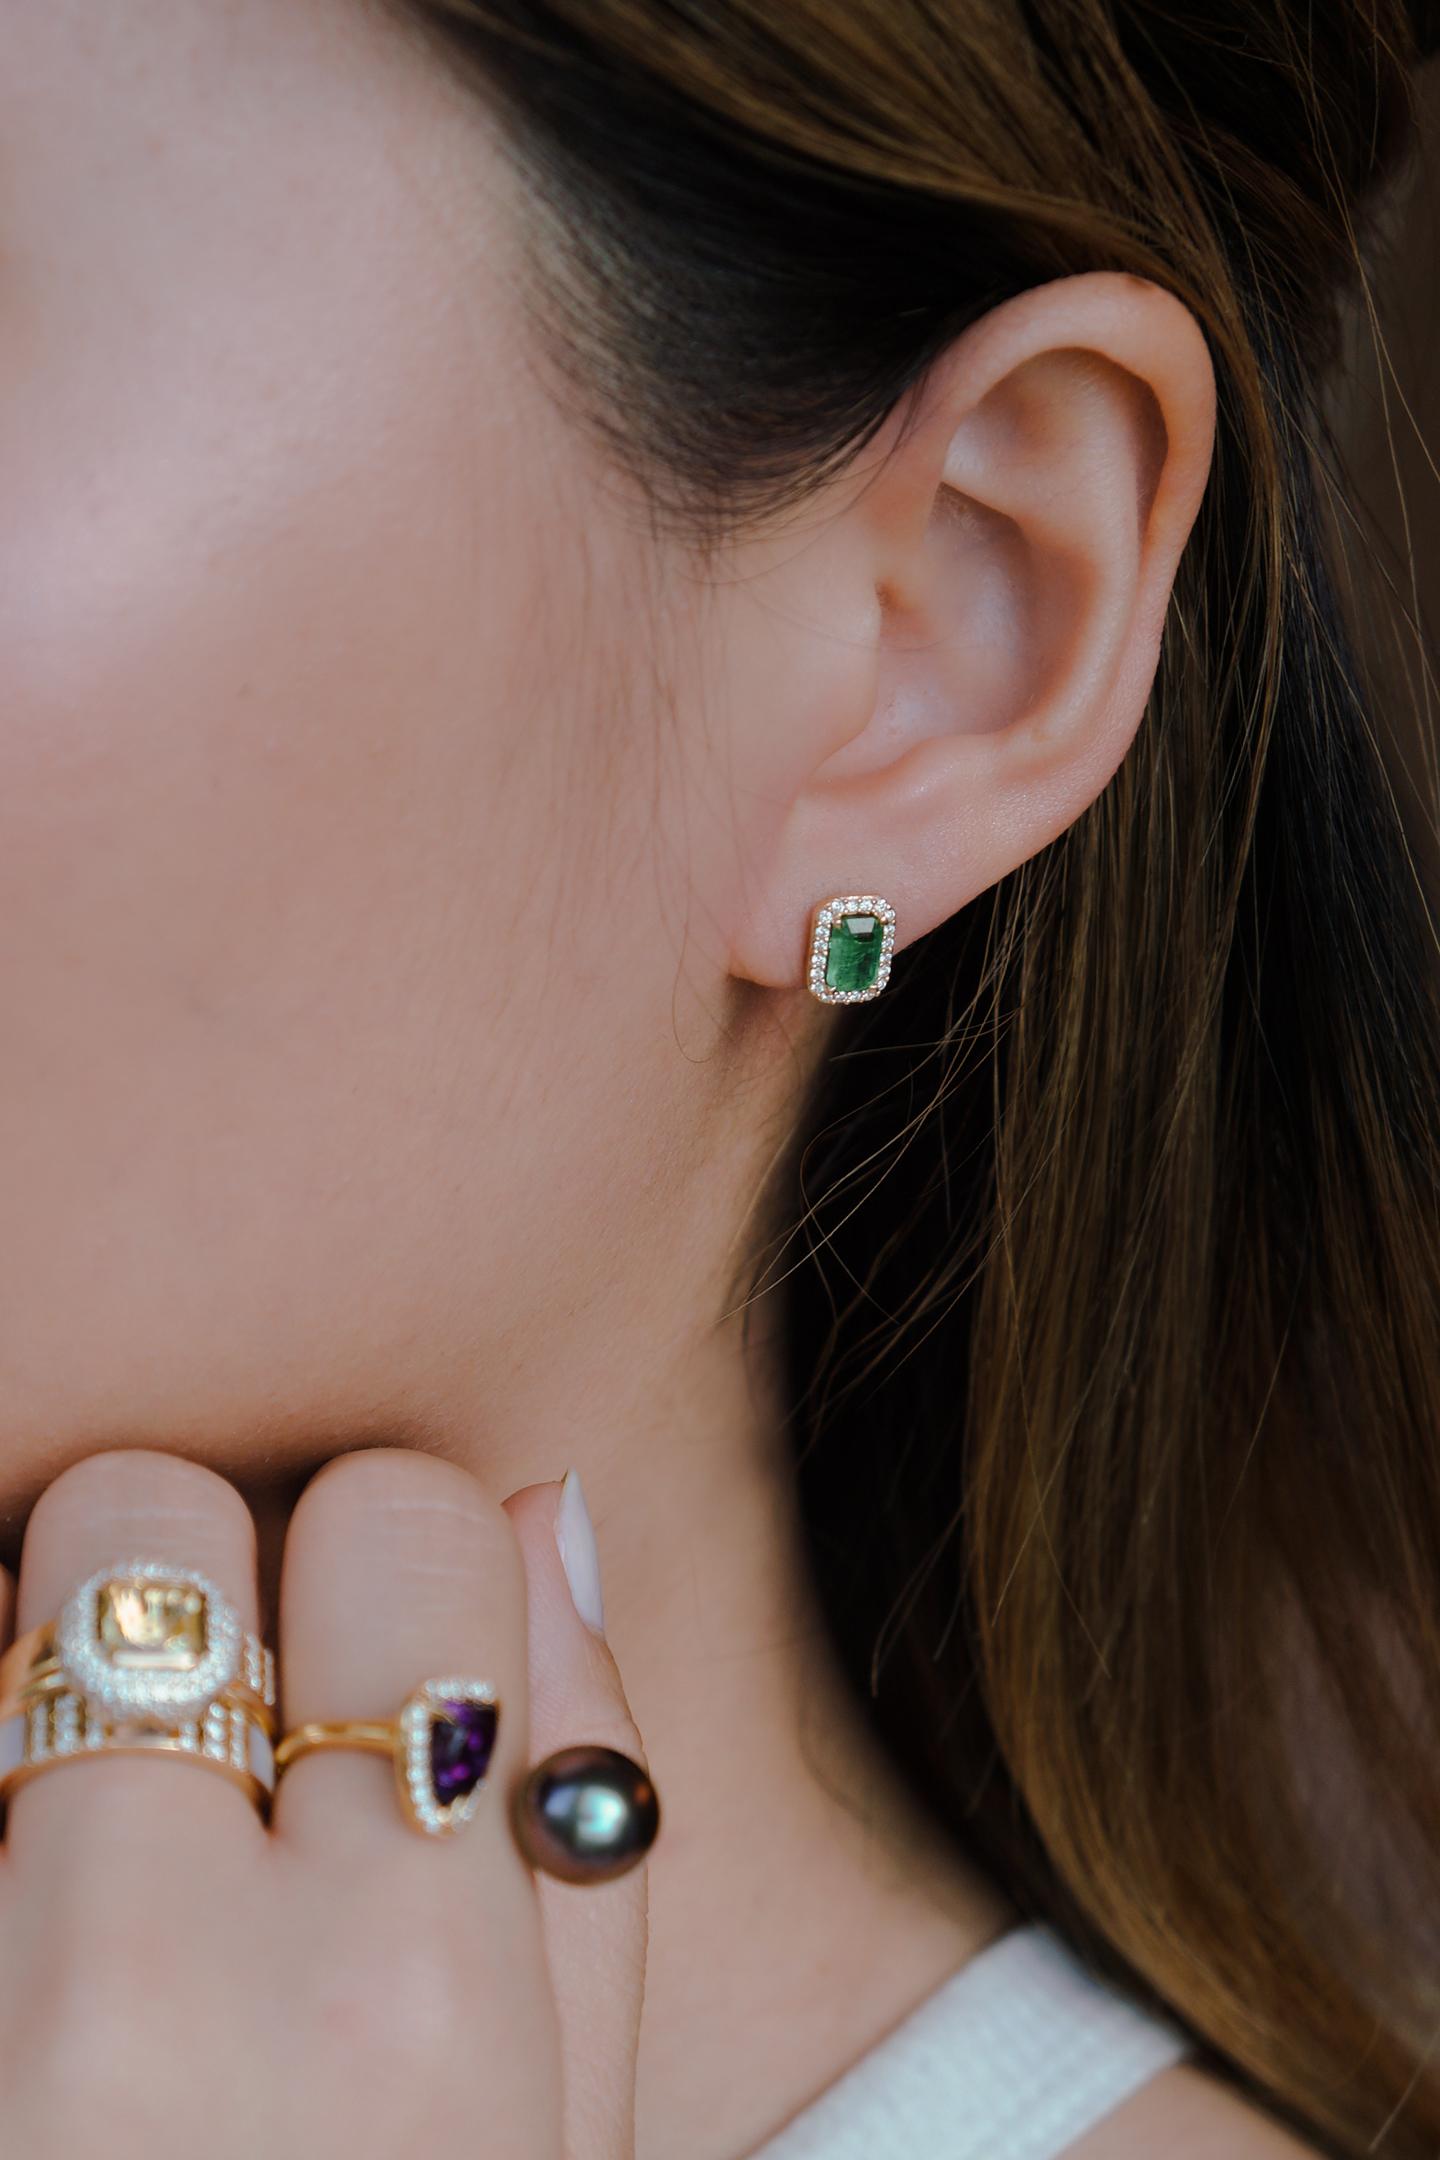 Rinoor Fine Jewelry's iconic Emerald and Diamond Stud Earrings stand as a testament to the brand's unwavering commitment to elegance, craftsmanship, and timeless beauty. These exquisite earrings are a harmonious blend of nature's finest gemstones